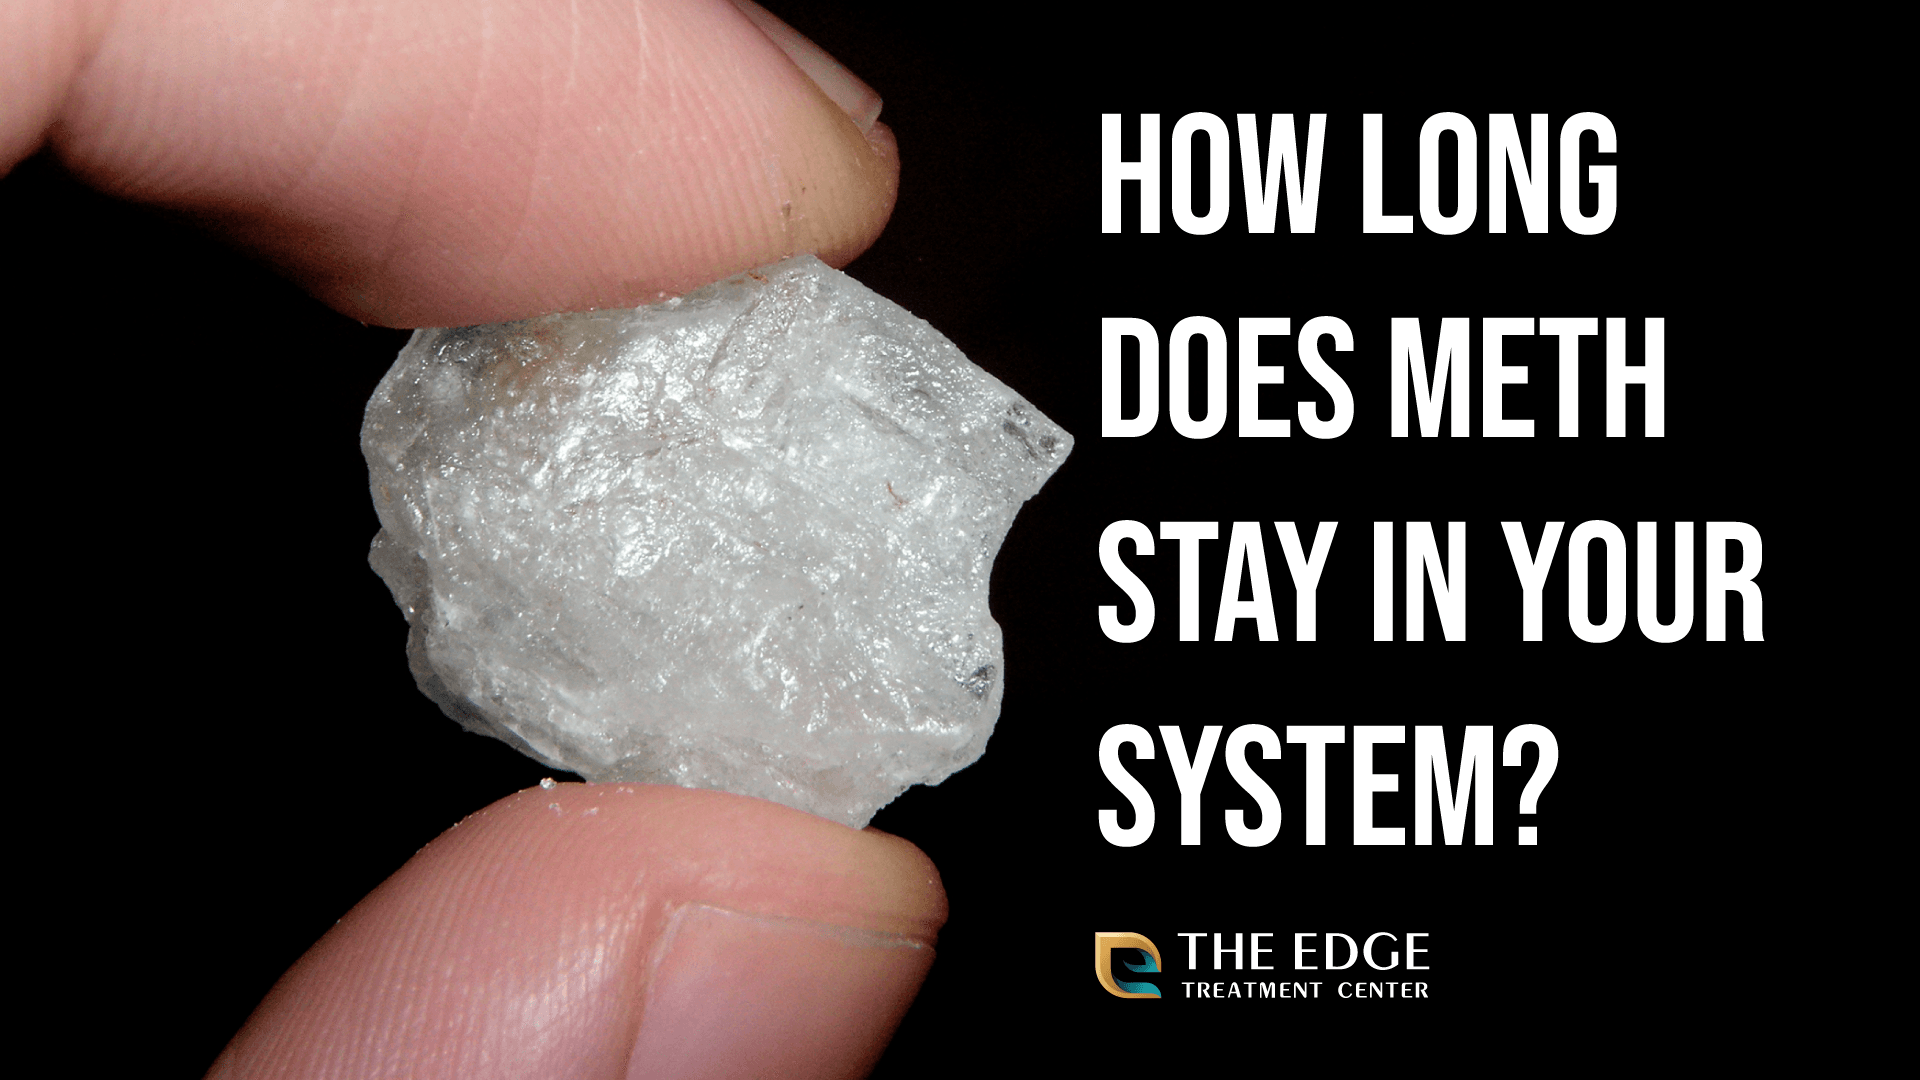 Meth Abuse: How Long Does Meth Stay in Your System?